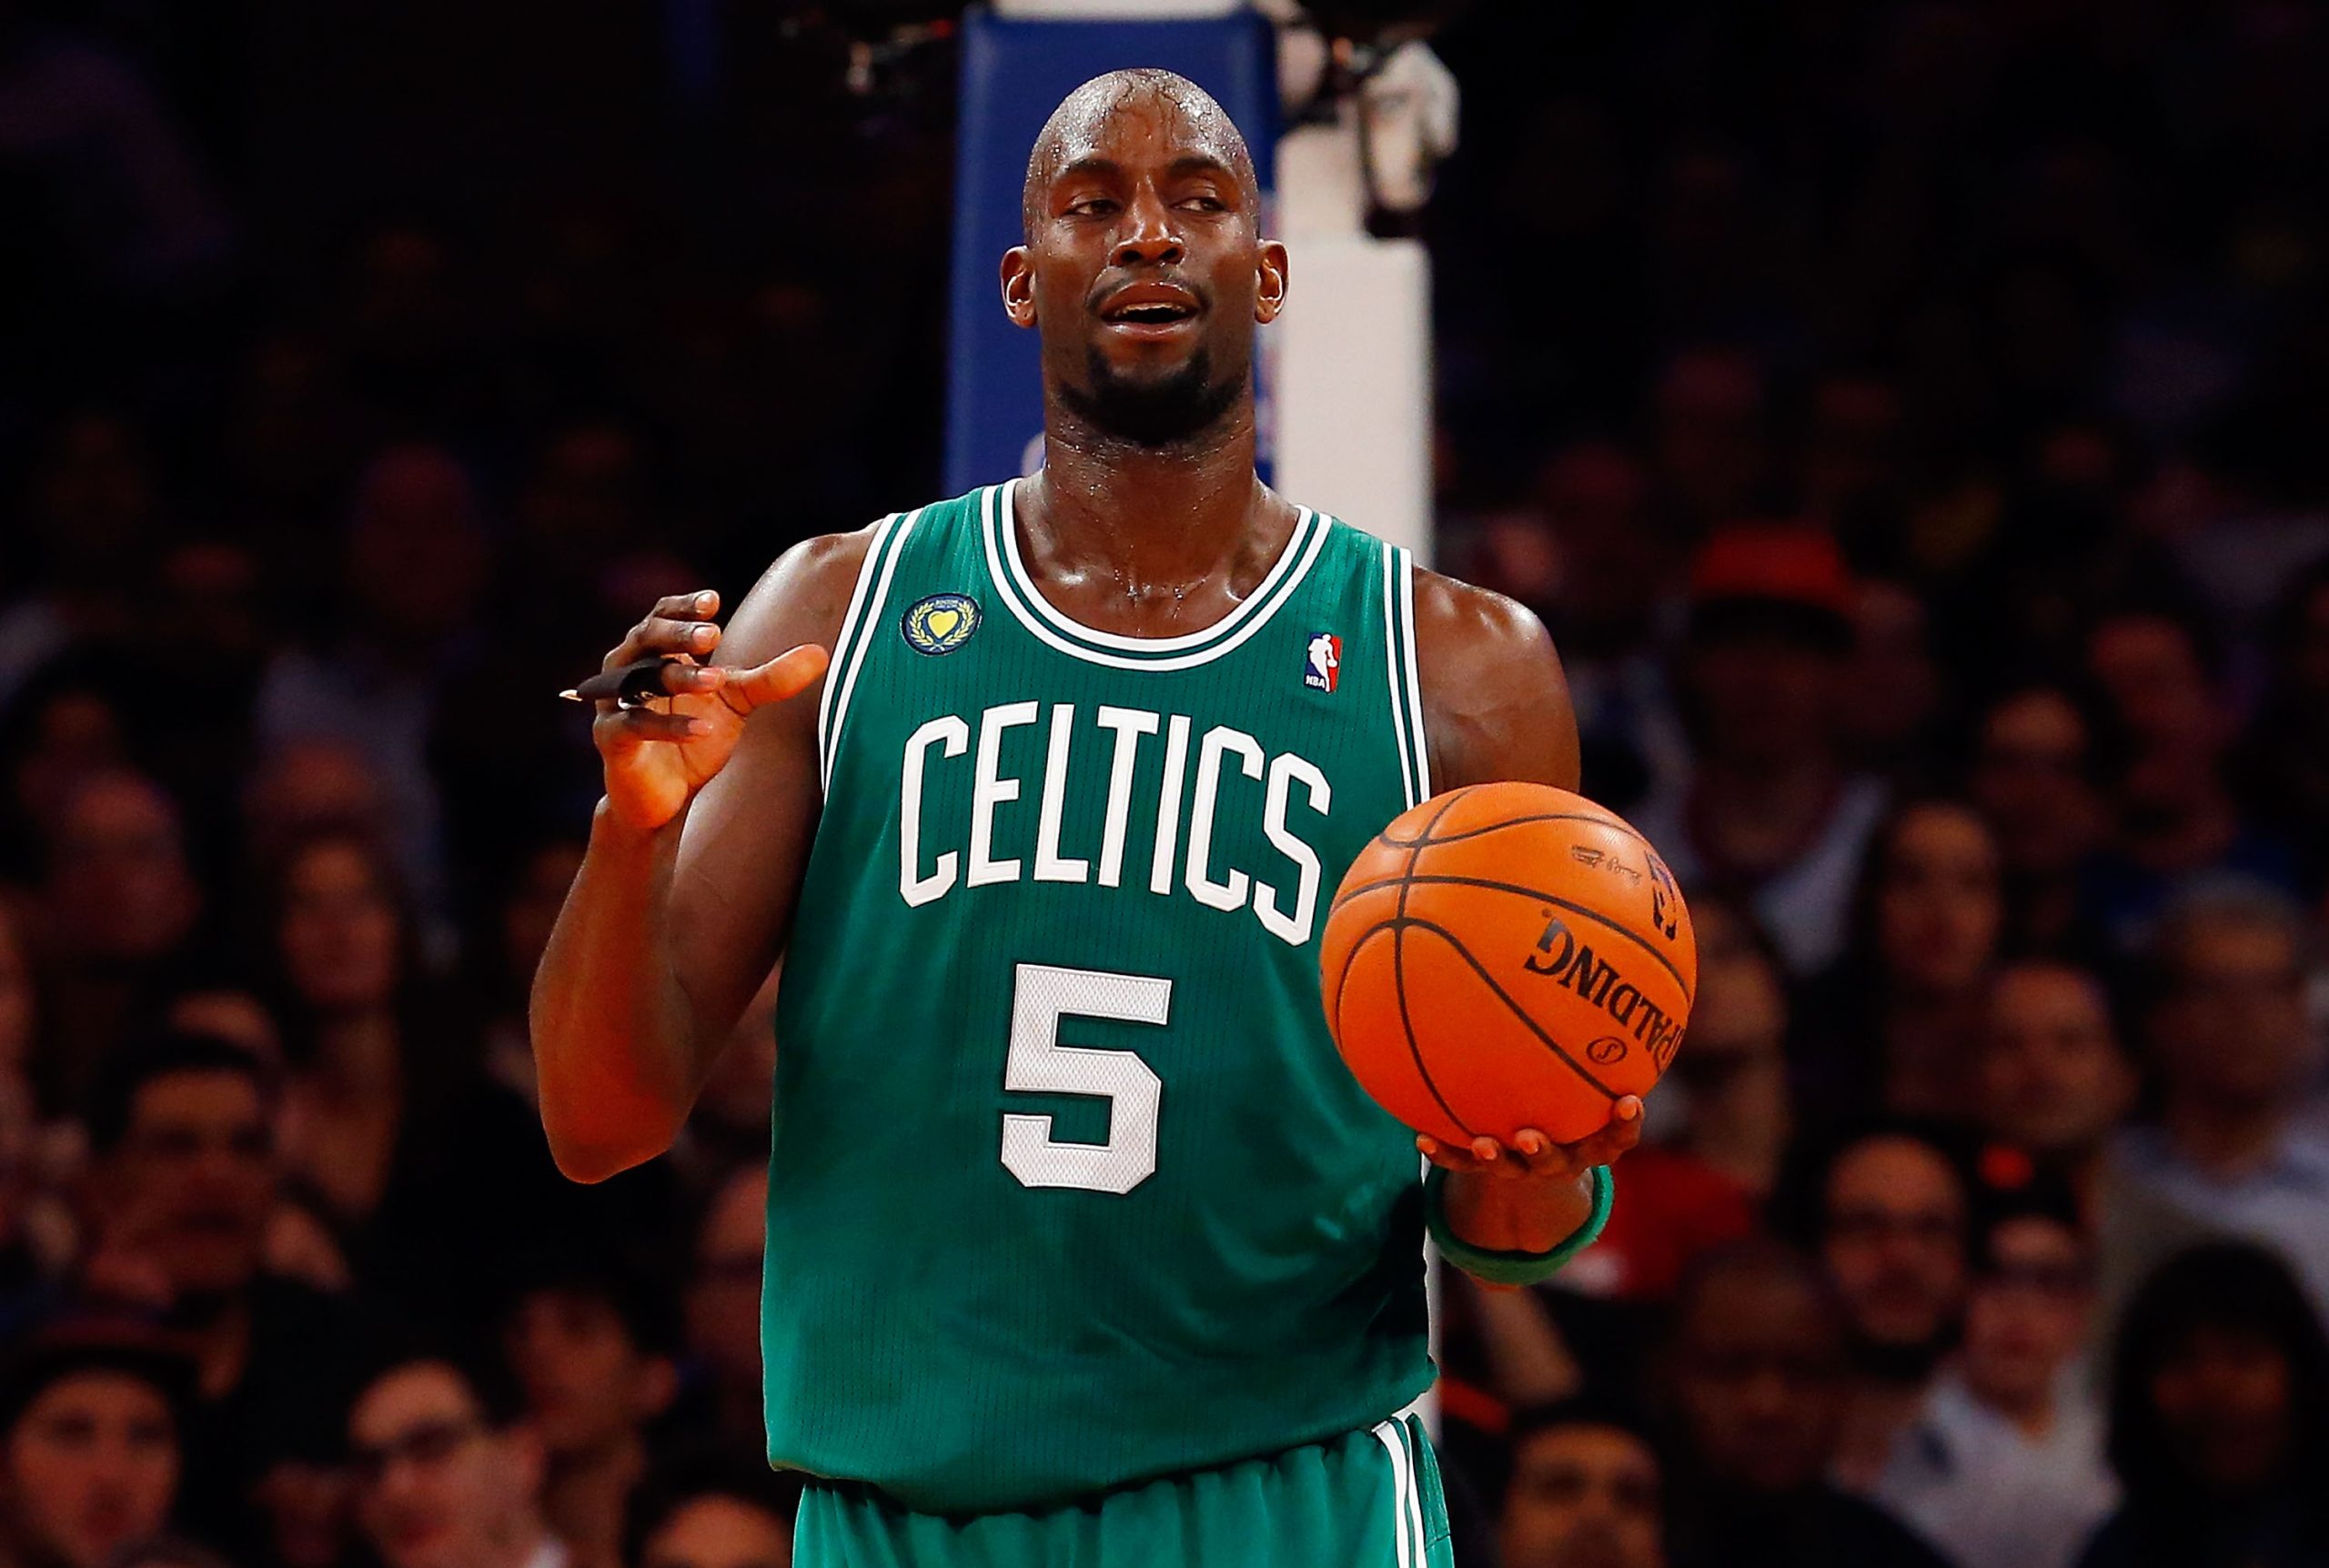 Here are 5 of the best plays Kevin Garnett made in a Celtics uniform